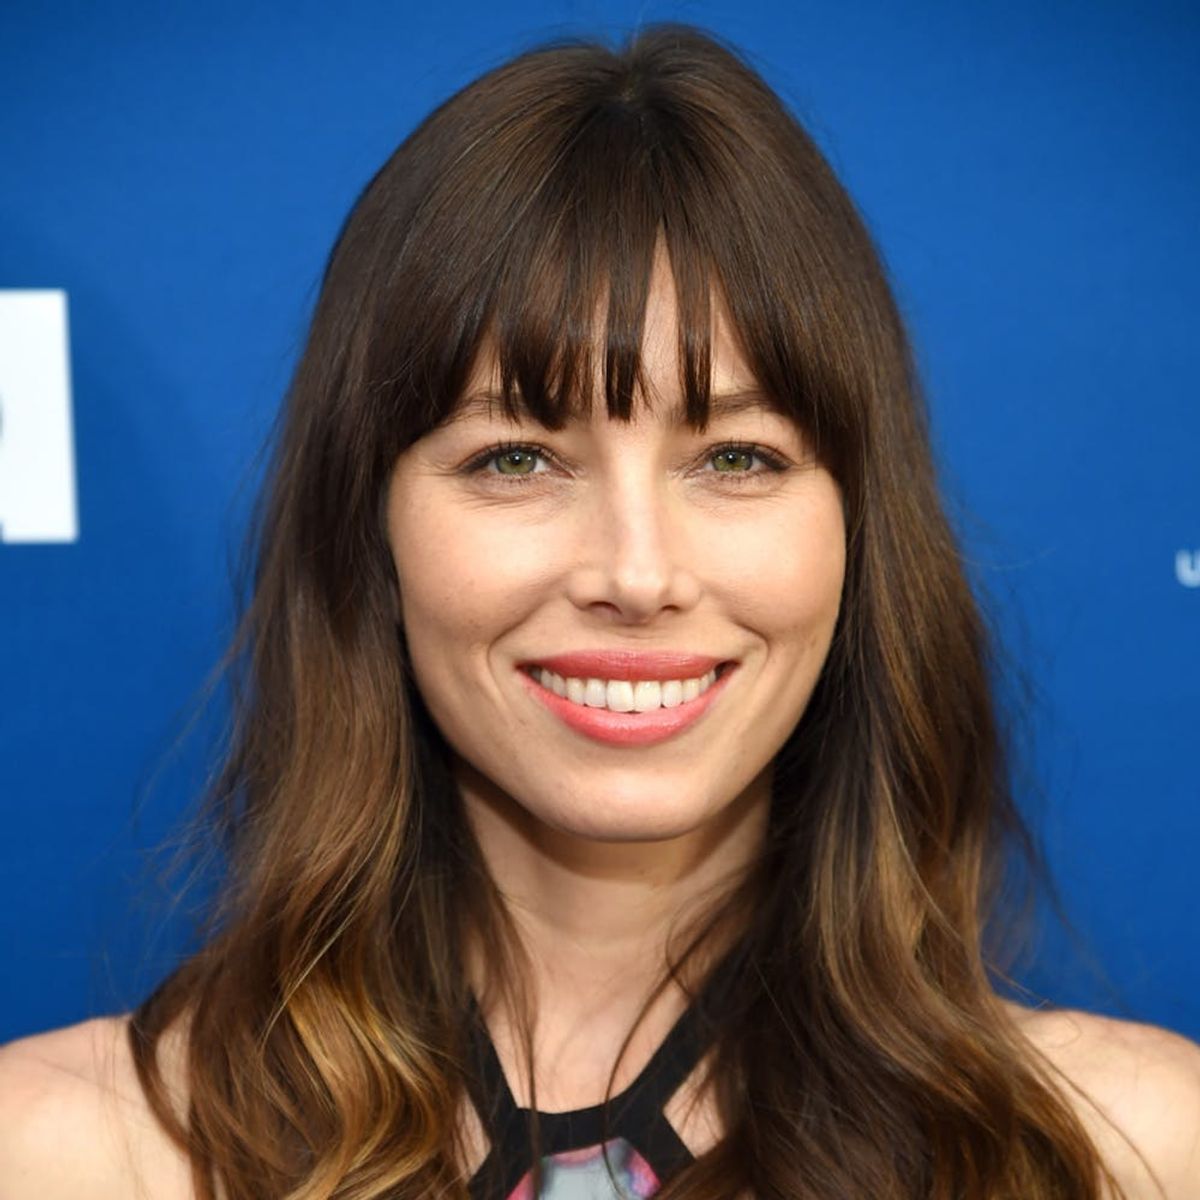 Jessica Biel Uses an $18 a Month Yoga App to Stay Fit and So Can You